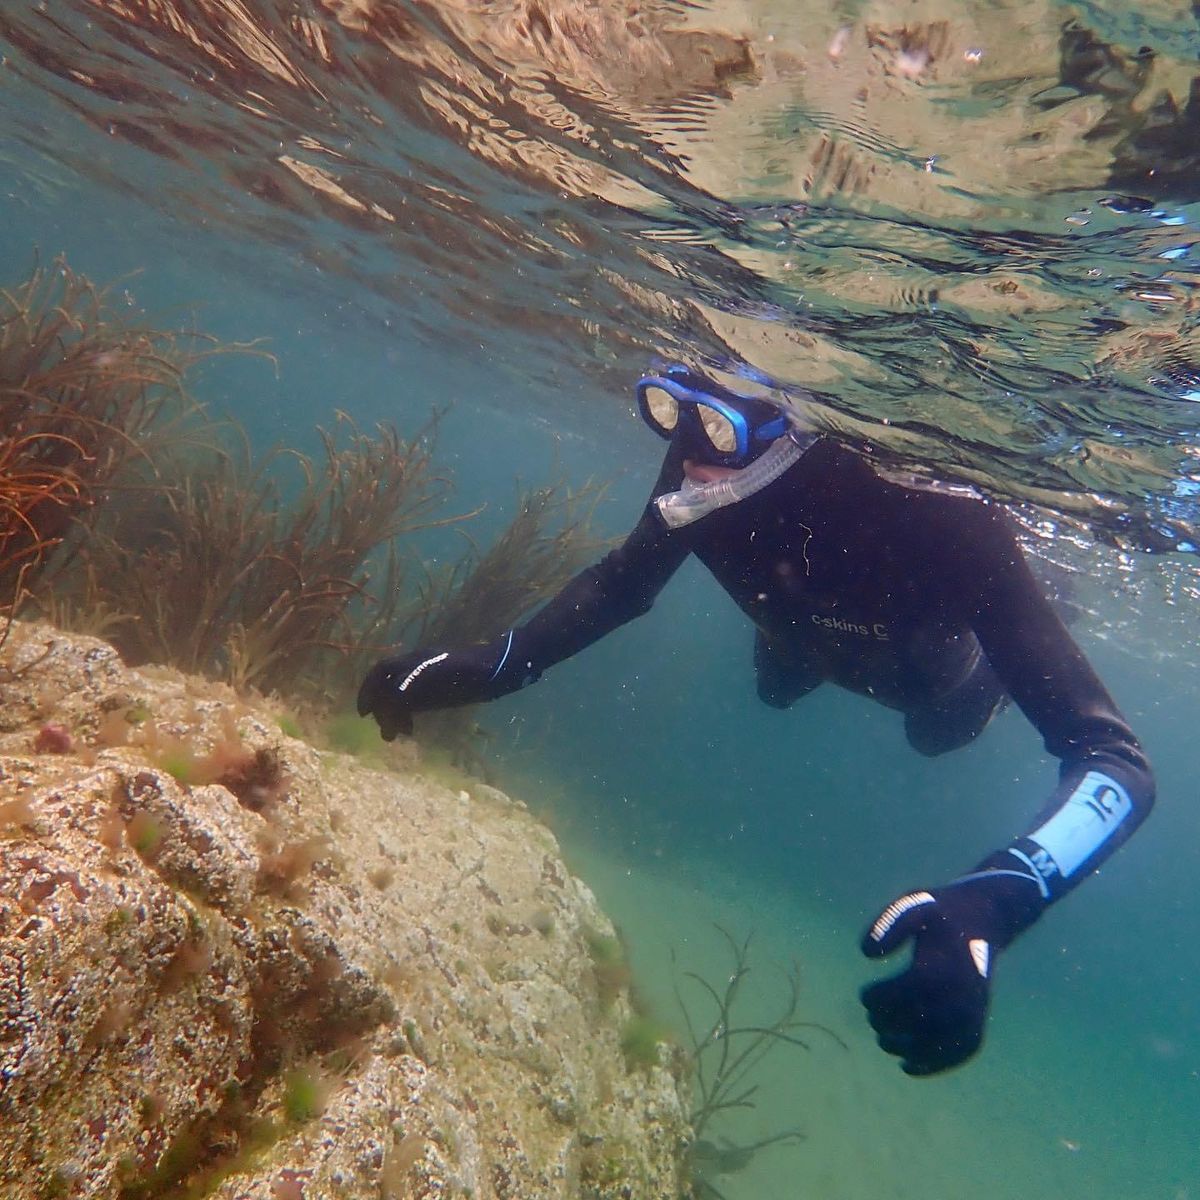 Discover Snorkelling on World Oceans Day - Coldingham Bay, Scotland UK - Beginners